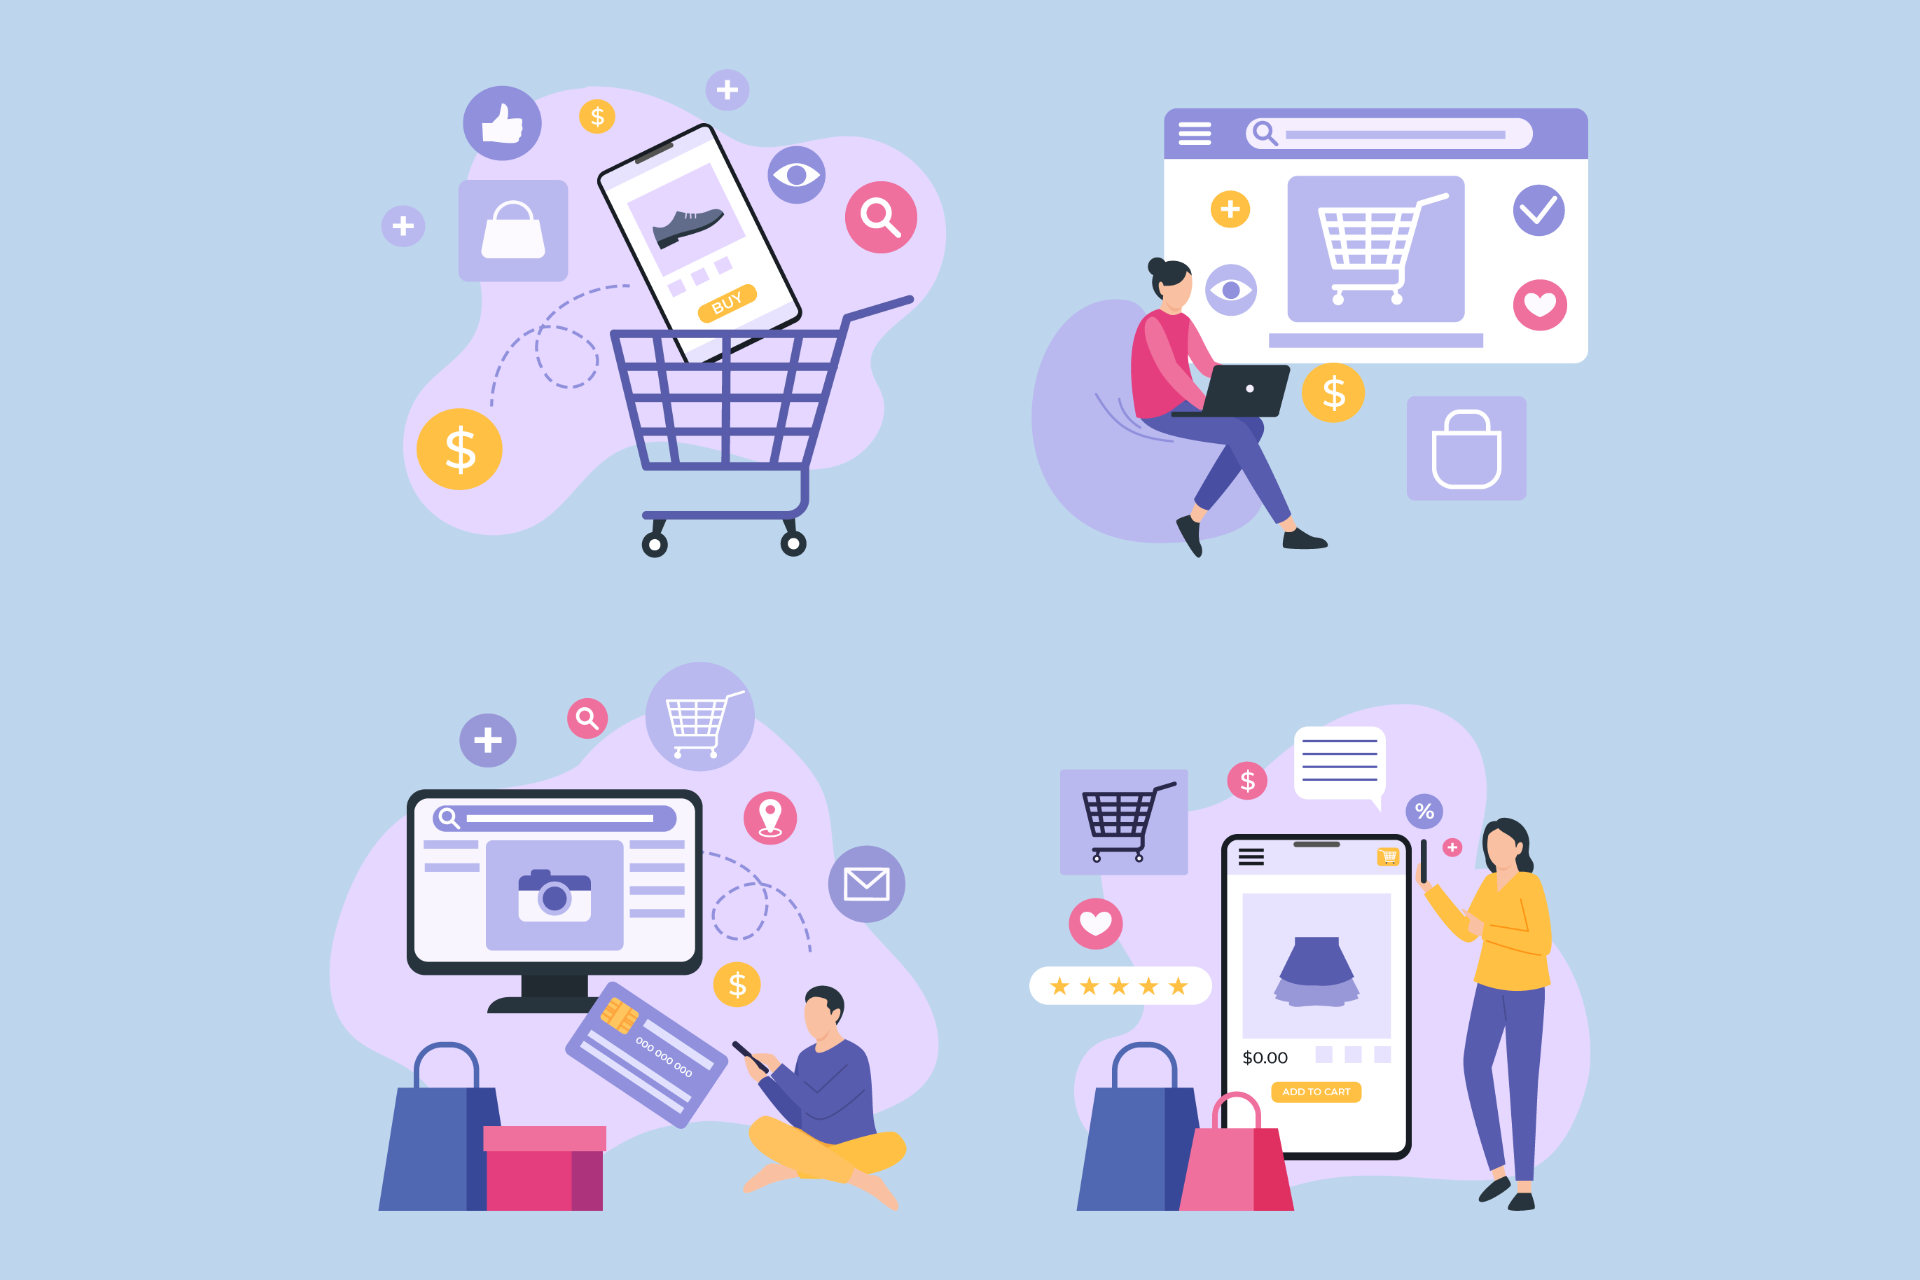 9 Amazing eCommerce Design Trends to Follow